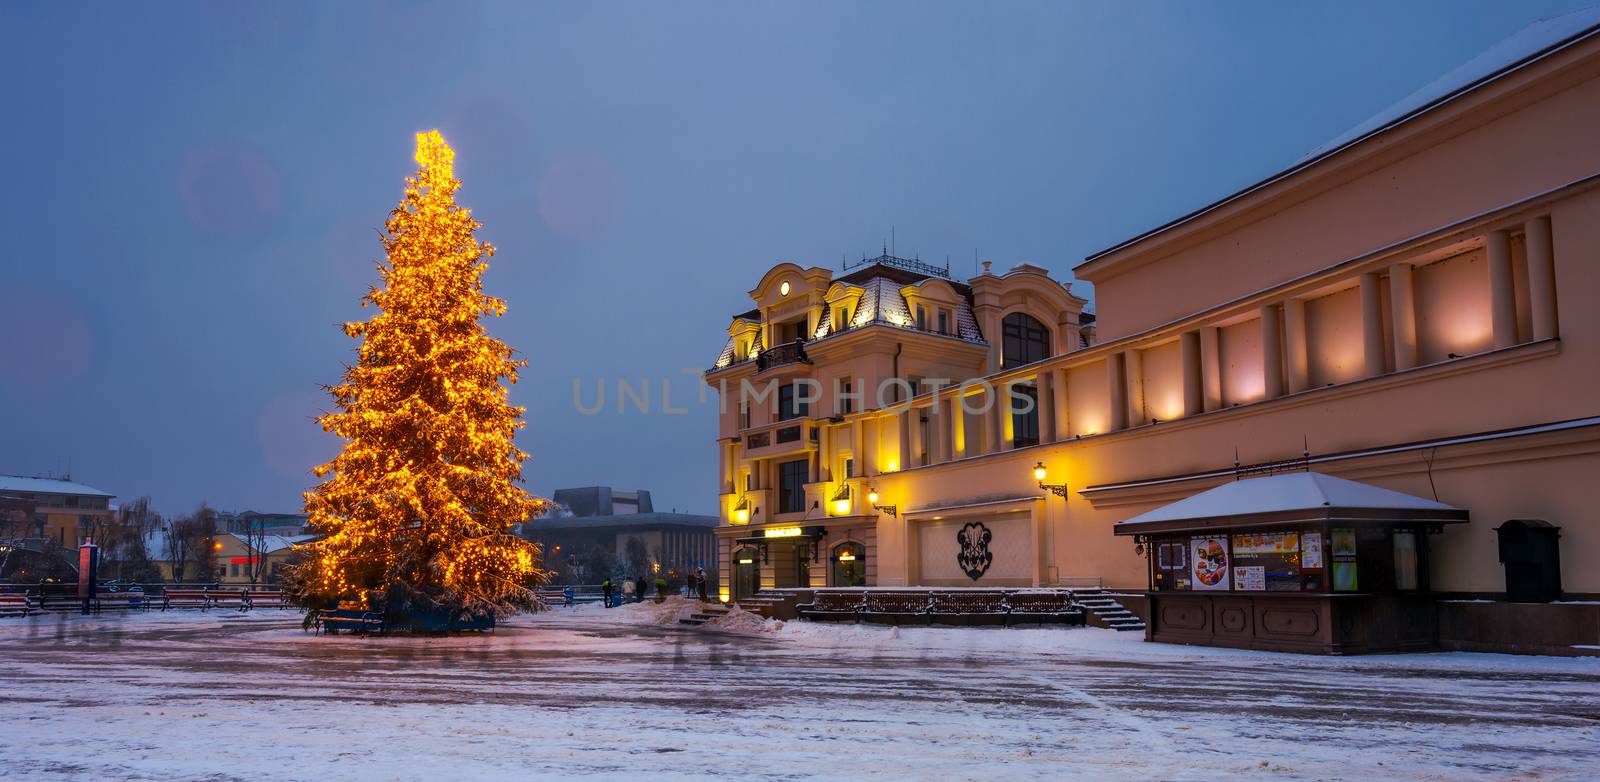 Christmas tree in the city center by Pellinni